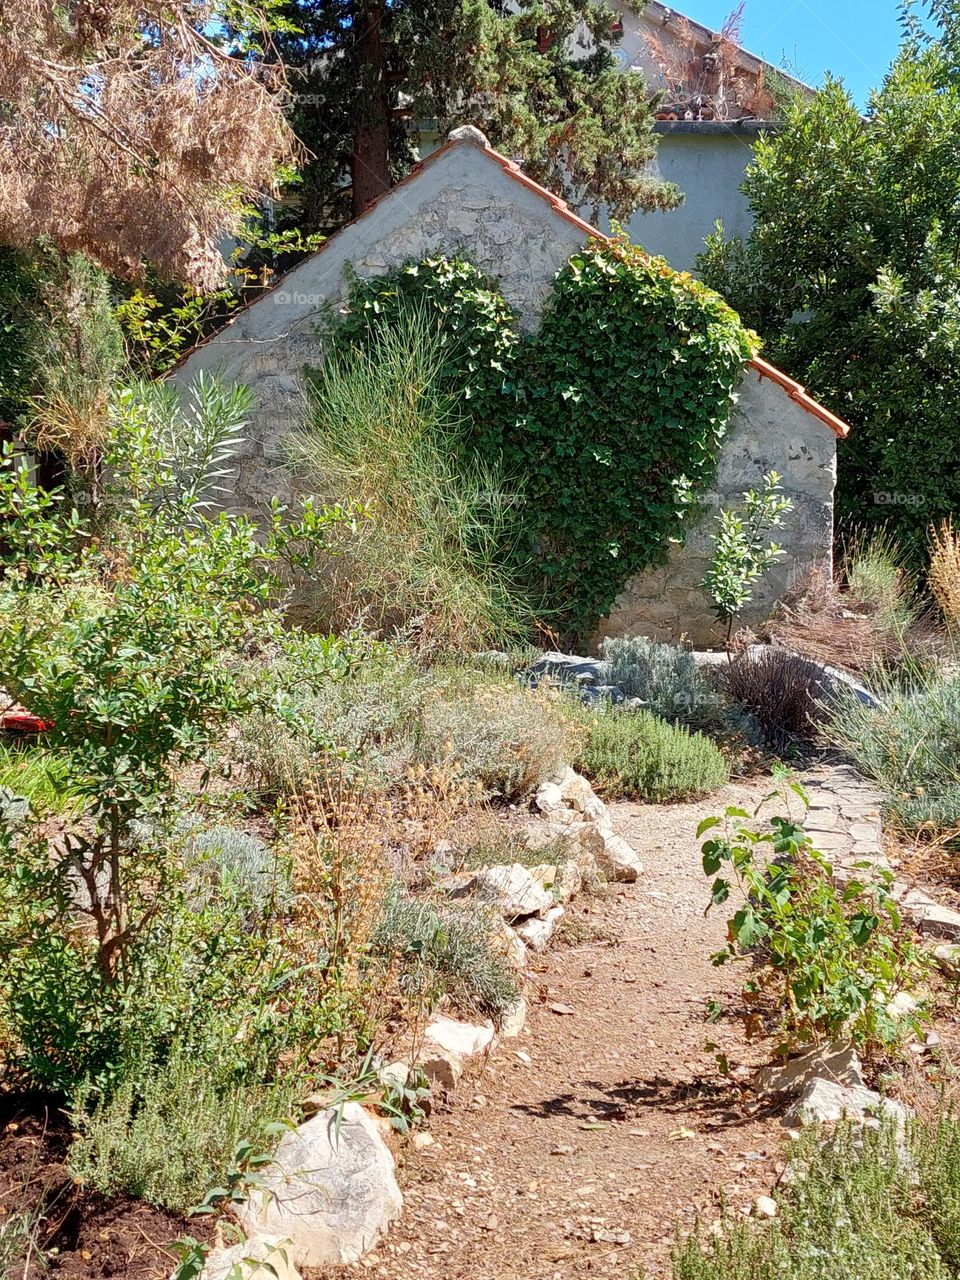 A garden decorated with various medical herbs and a small house overgrown with creepers in the shape of heart